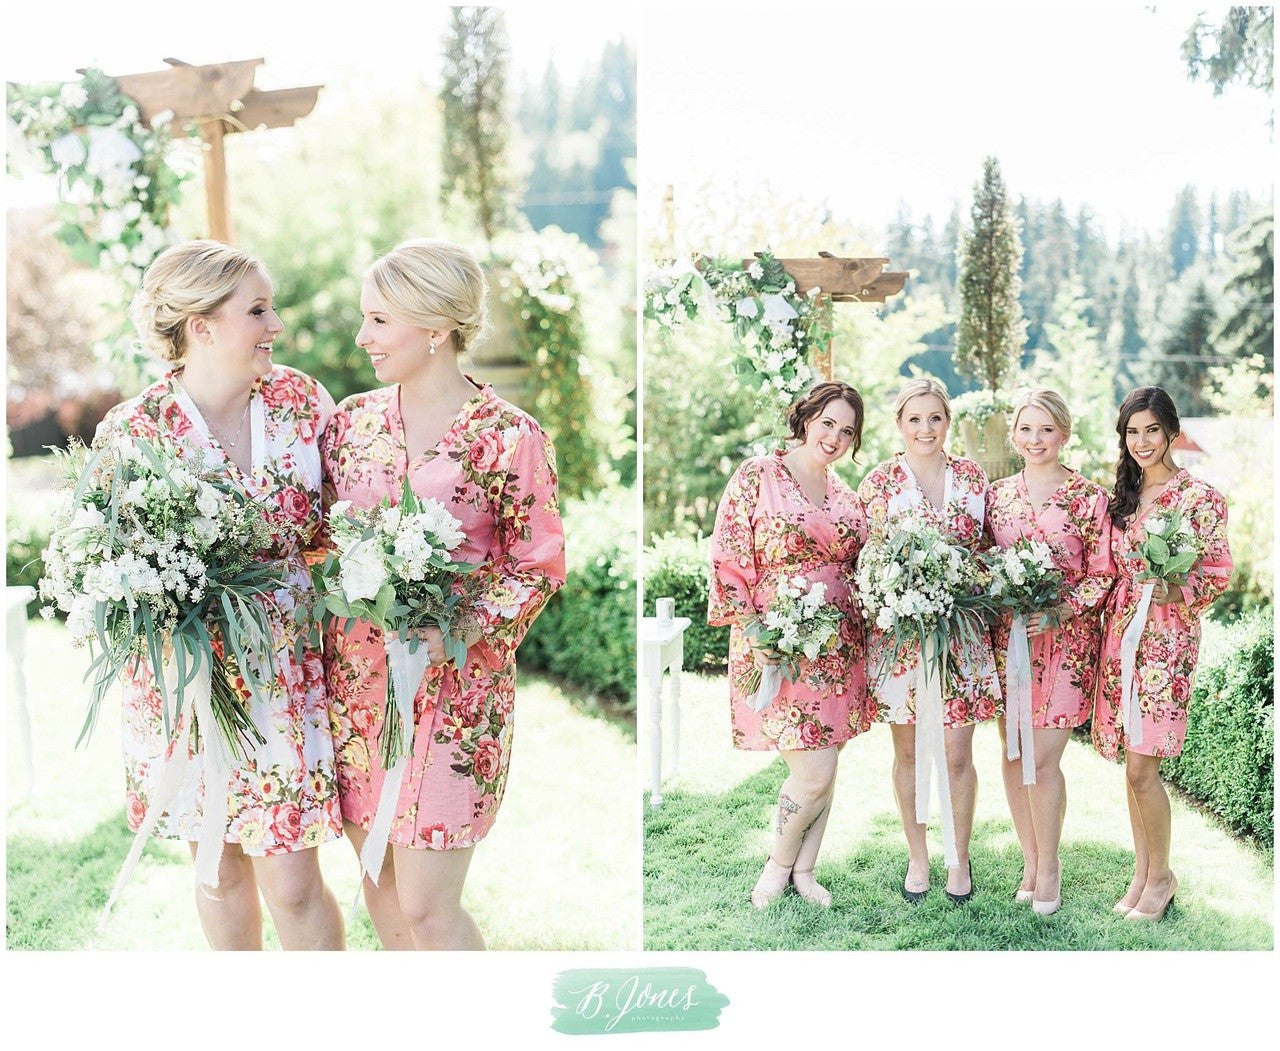 Coral Rosy Red Posy Robes for bridesmaids